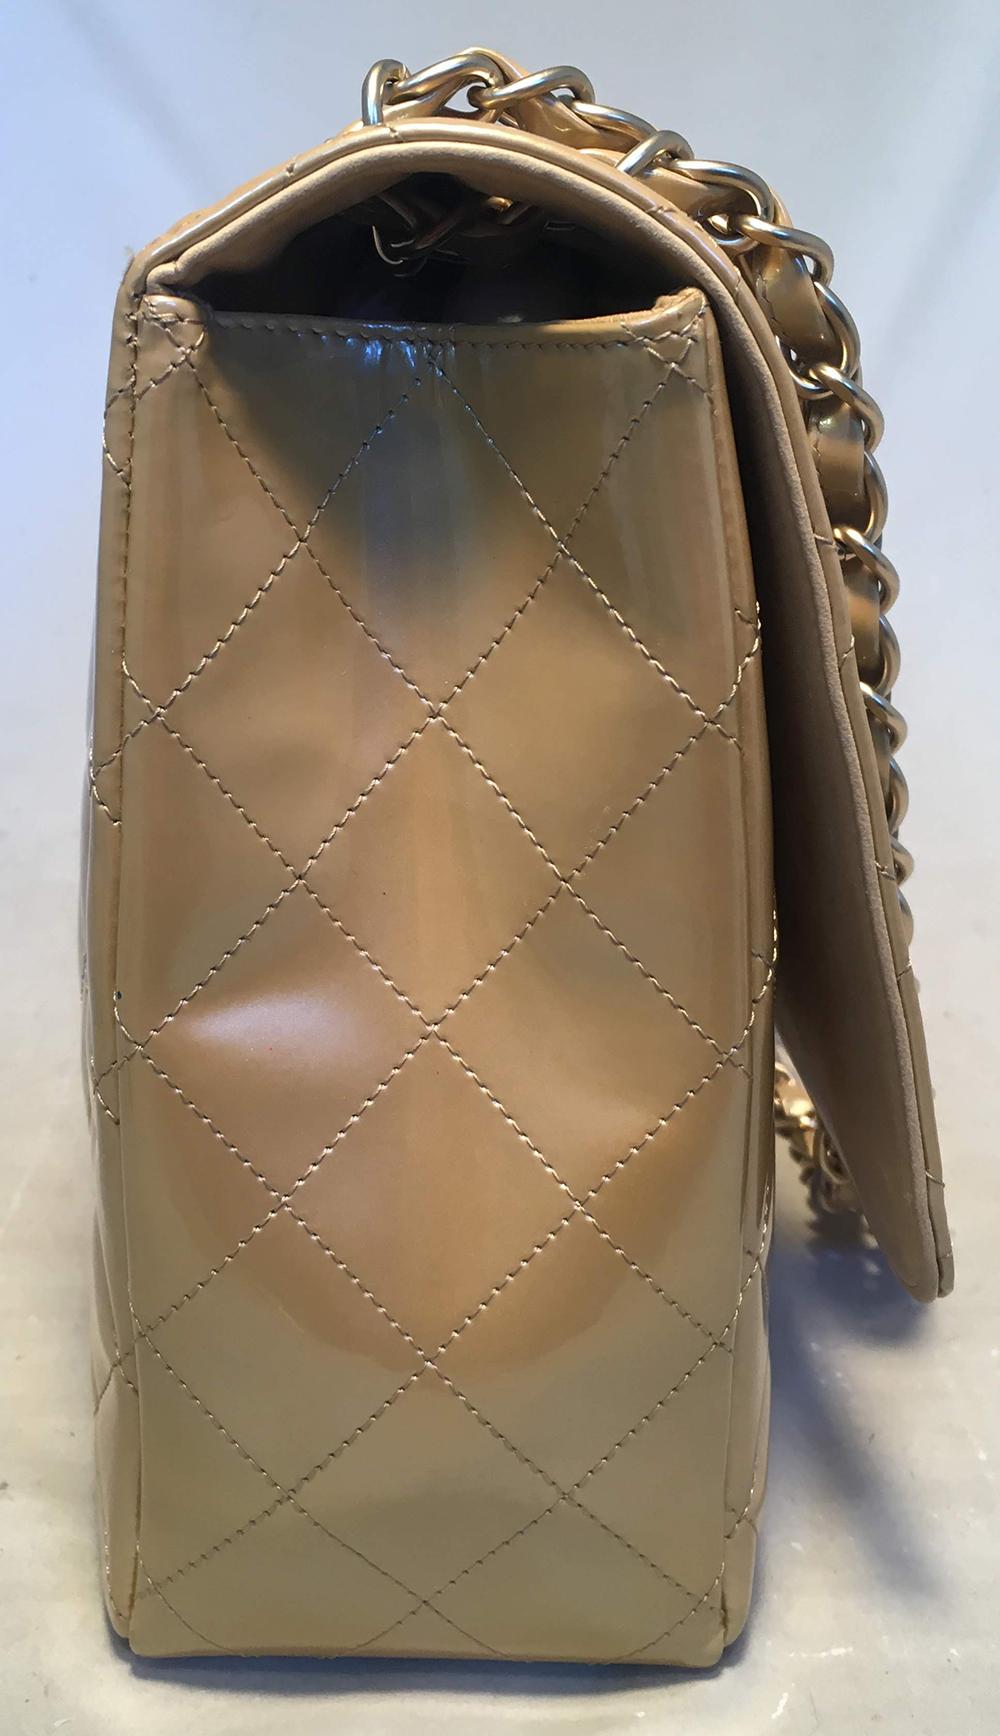 RARE Chanel Nude Gold Pearlized Patent Leather Maxi Classic Flap Shoulder bag in excellent condition. Gold quilted pearlized patent leather exterior trimmed with matte gold hardware. Woven chain and leather shoulder strap. Exterior back side slit